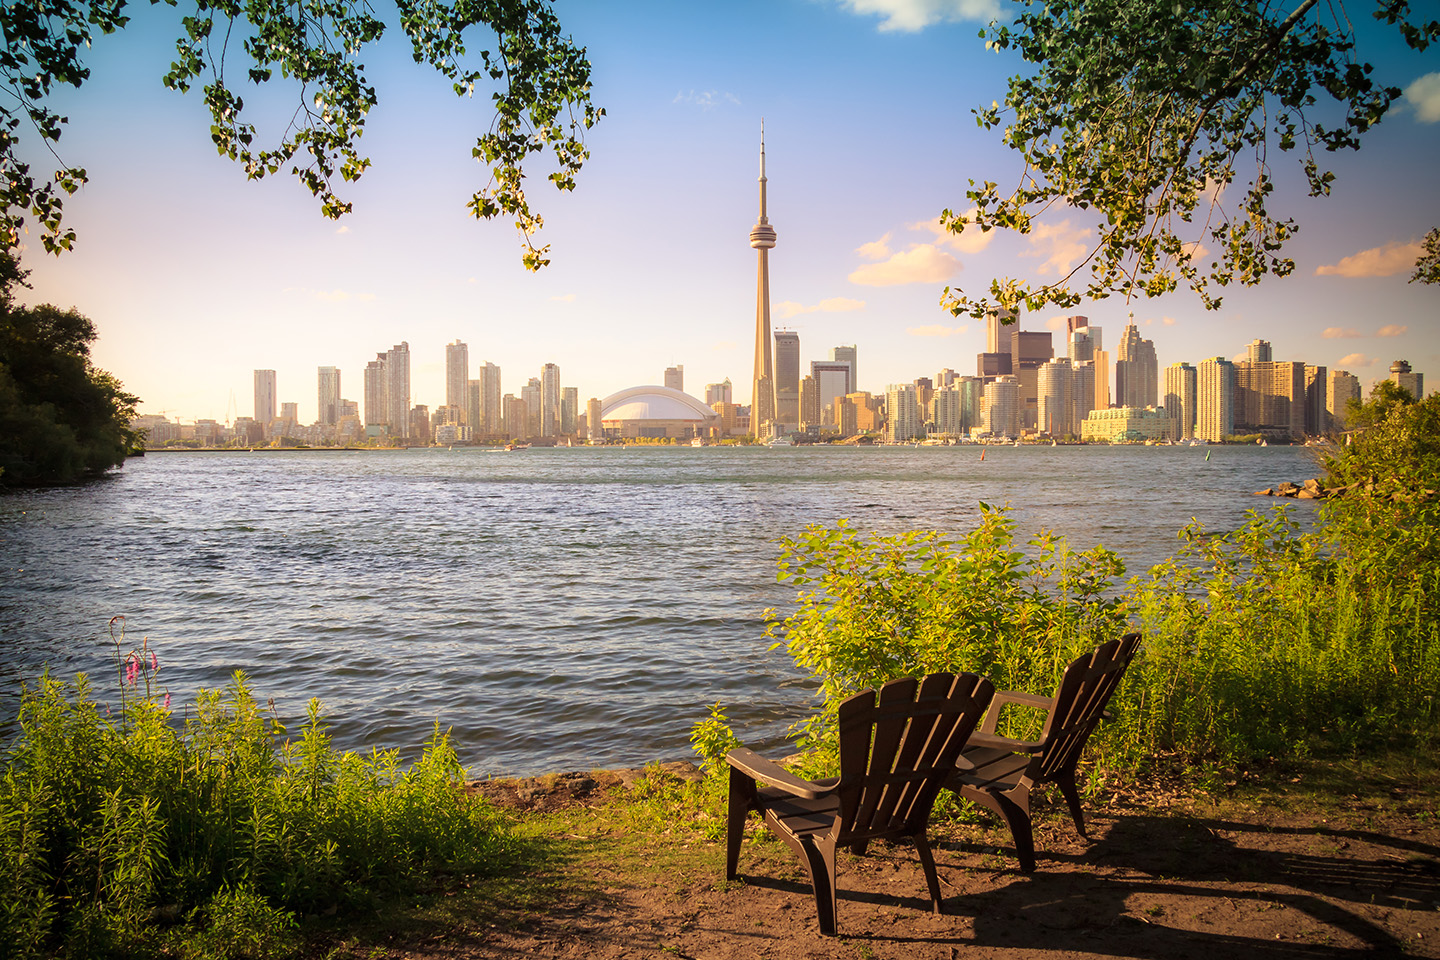 A picturesque view of Toronto at sunset, seen from Algonquin Island. Two benches look out onto the water, with trees hanging down above them.